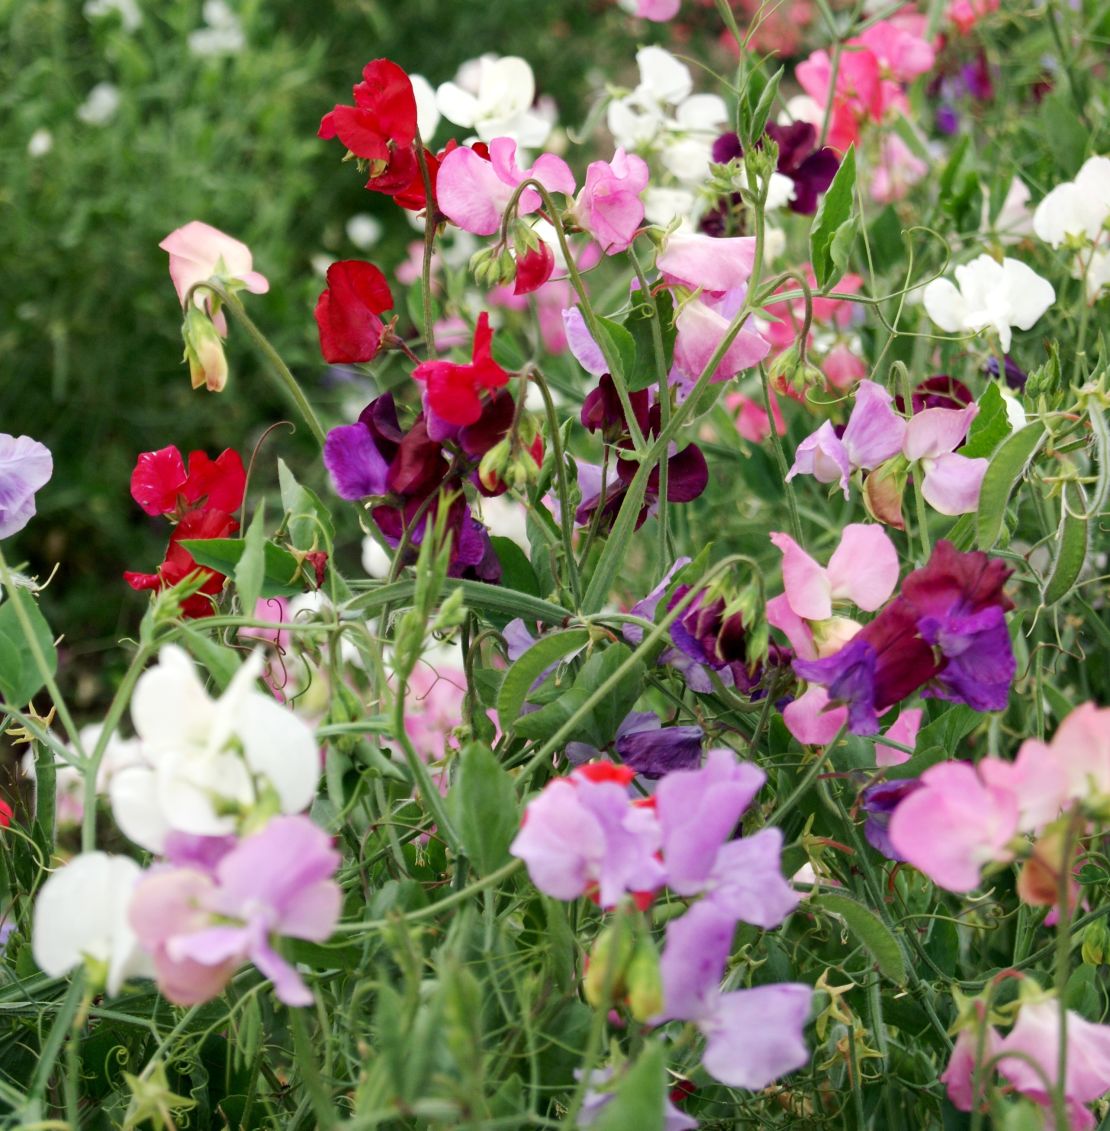 <em>Shown here: ‘Knee High Mix’ sweet pea features a blend of perfumed types that open flowers in shades of pink, lavender, rose, purple, burgundy and white.</em>